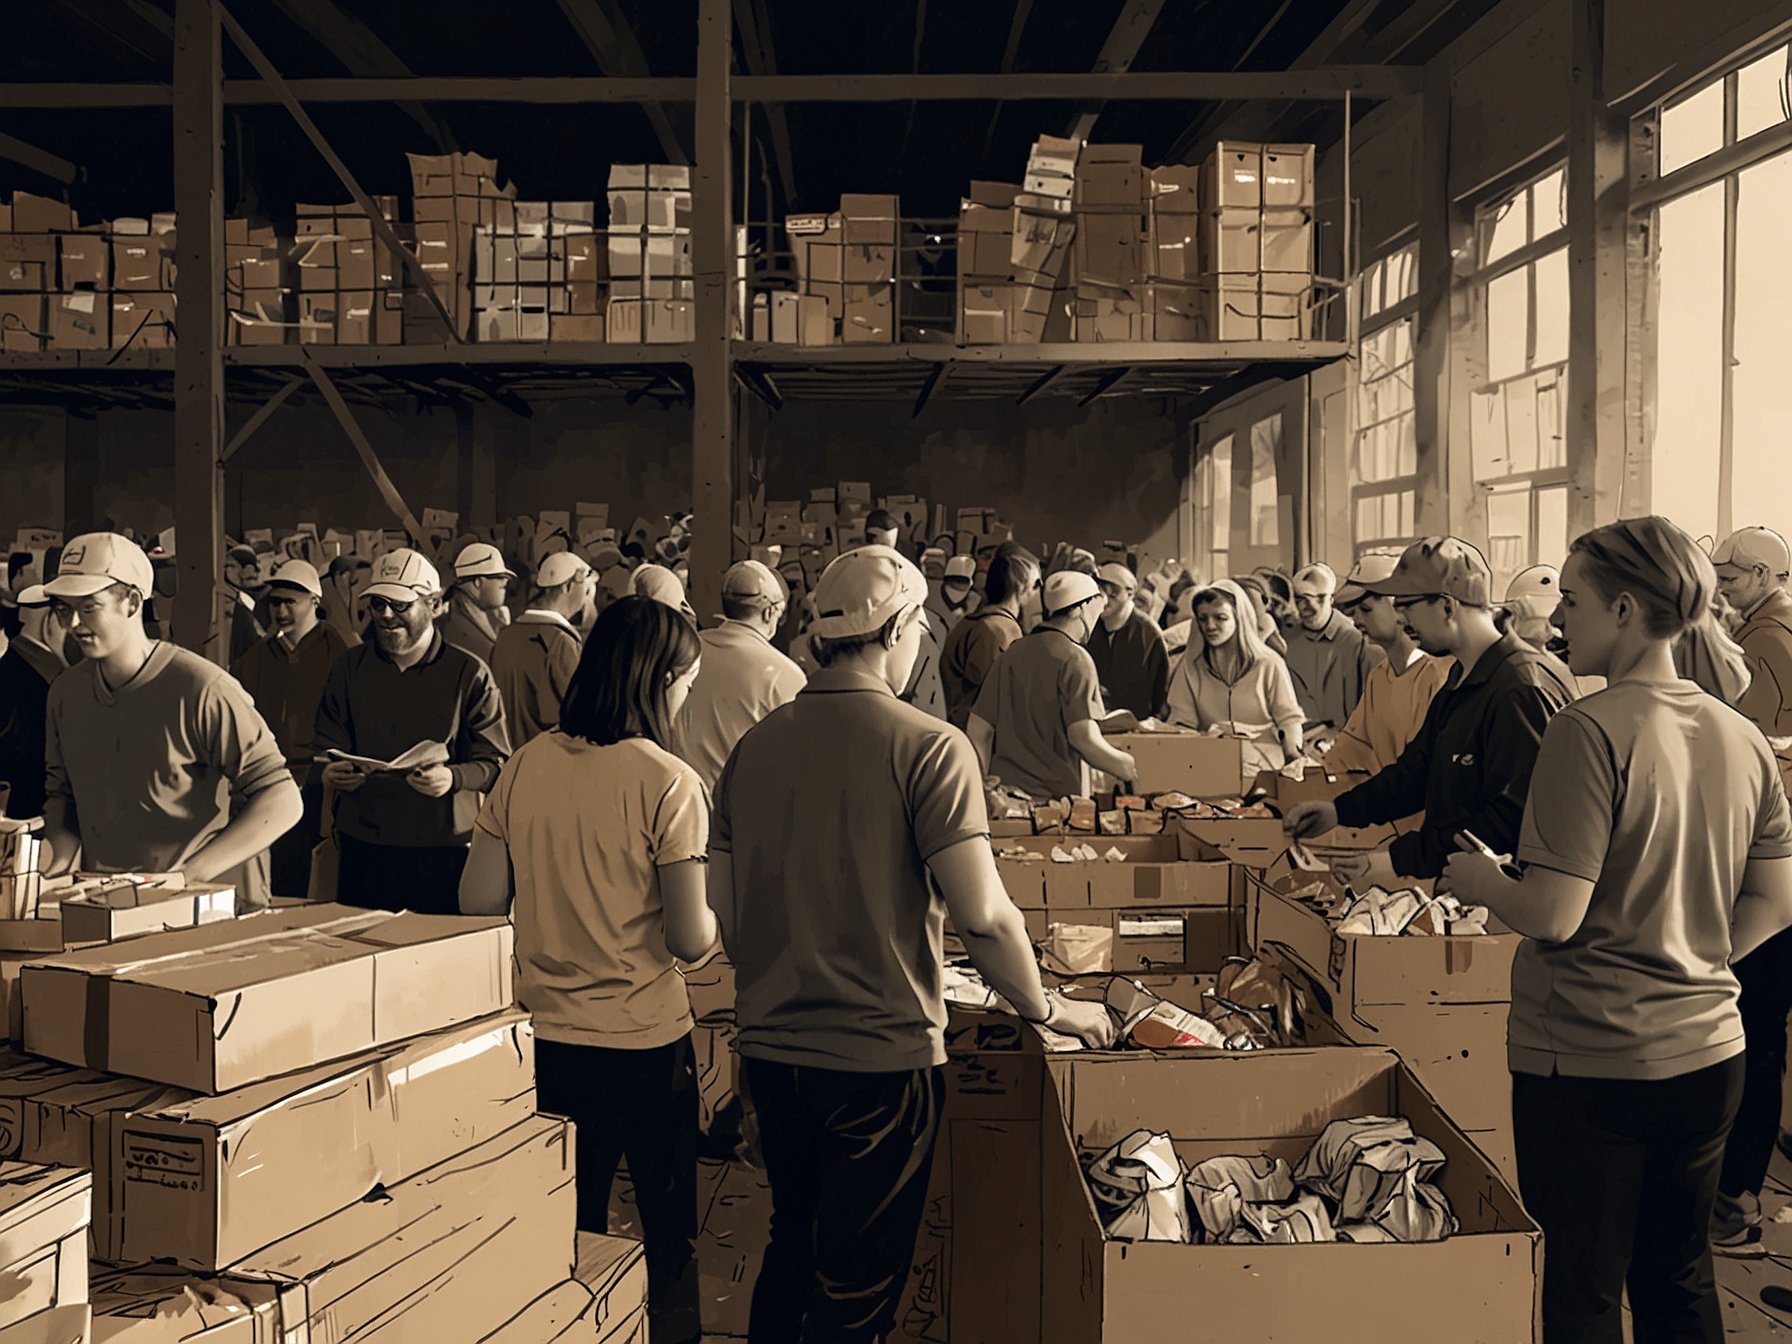 A crowded food bank with volunteers distributing food parcels. The image captures the overwhelming demand and the strain on resources, reflecting the skyrocketing need for assistance.